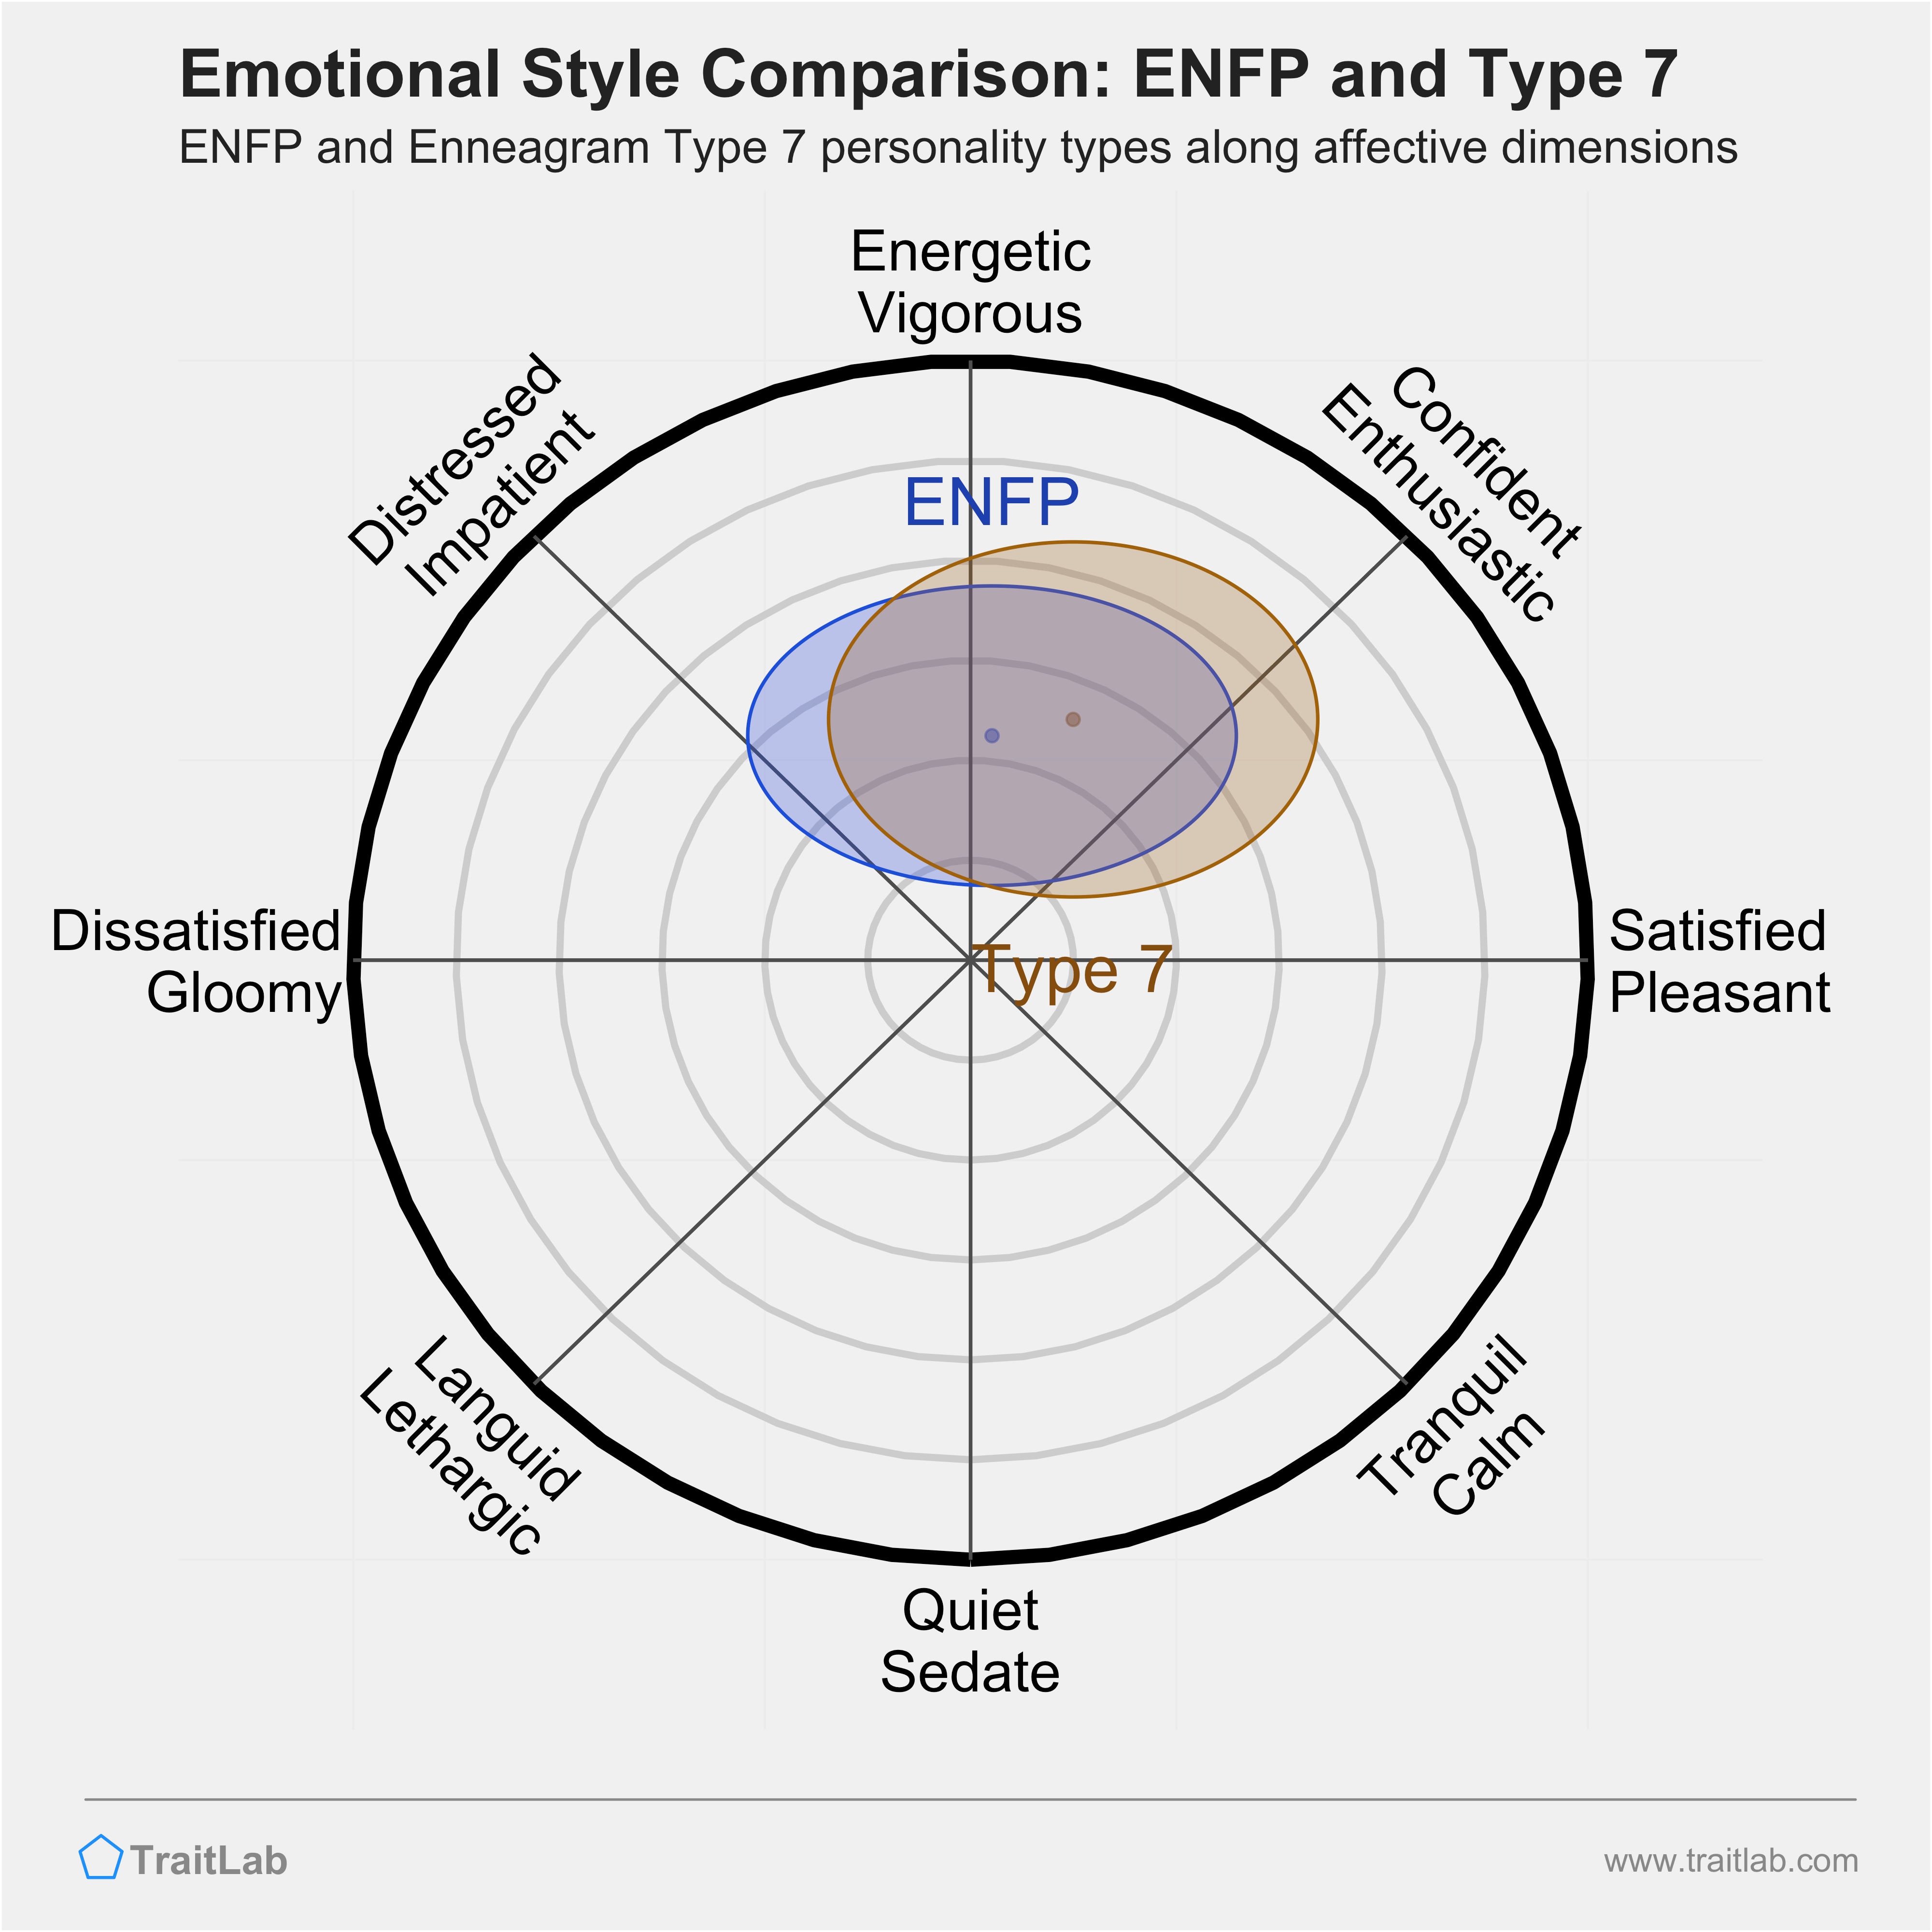 ENFP and Type 7 comparison across emotional (affective) dimensions